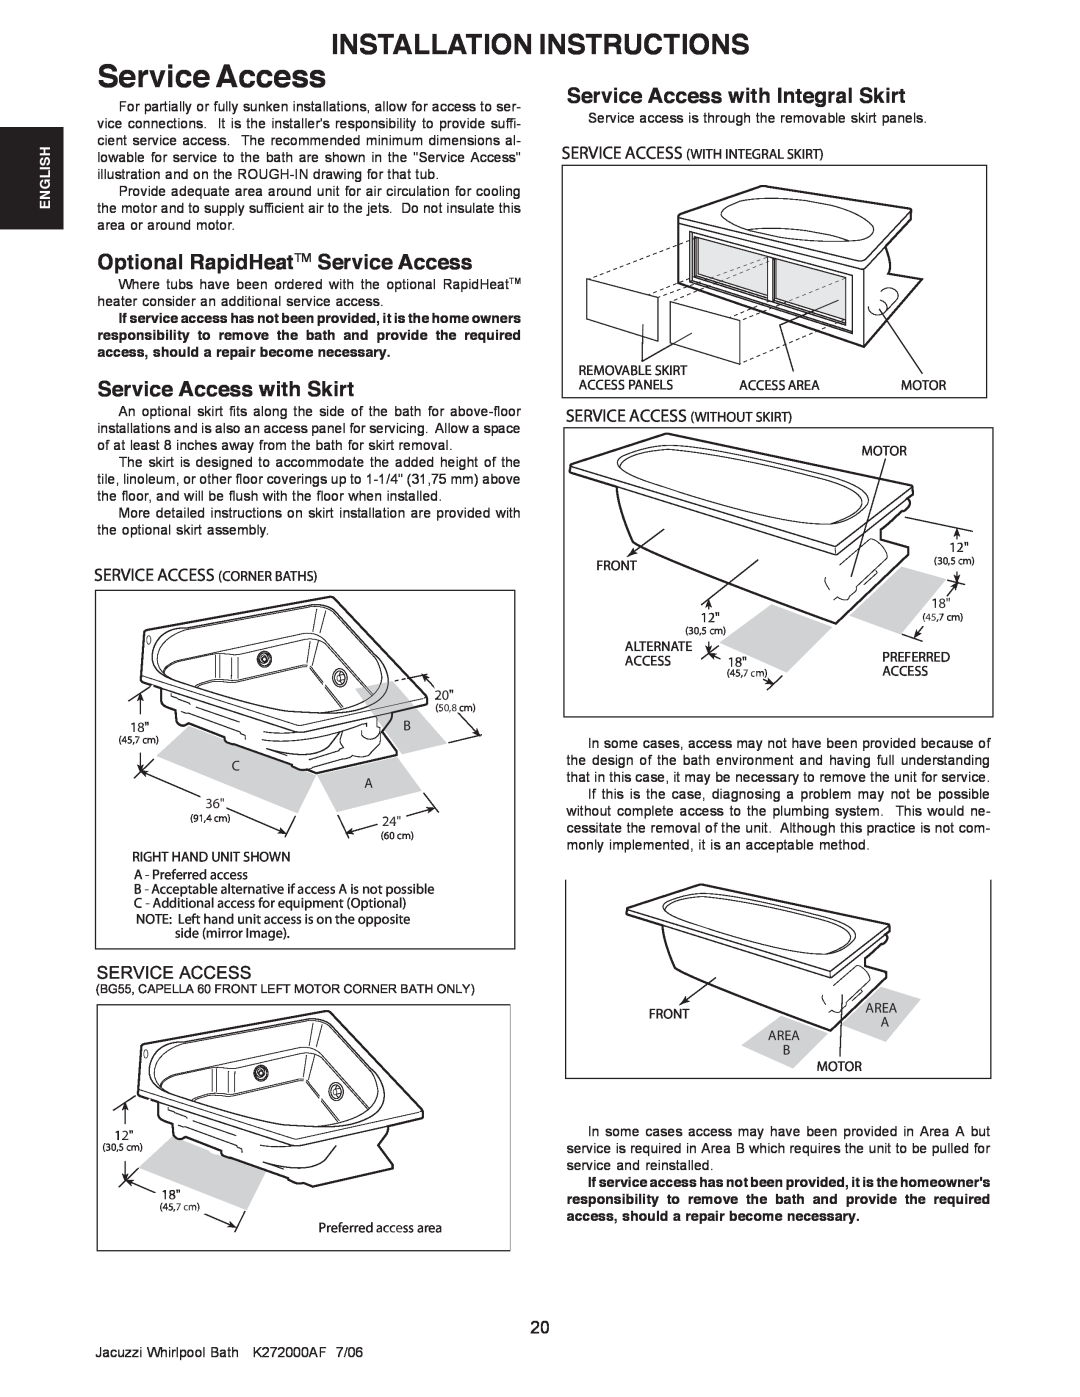 Jacuzzi K272000AF 7/06 manual Optional RapidHeatTM Service Access, Service Access with Skirt, Installation Instructions 